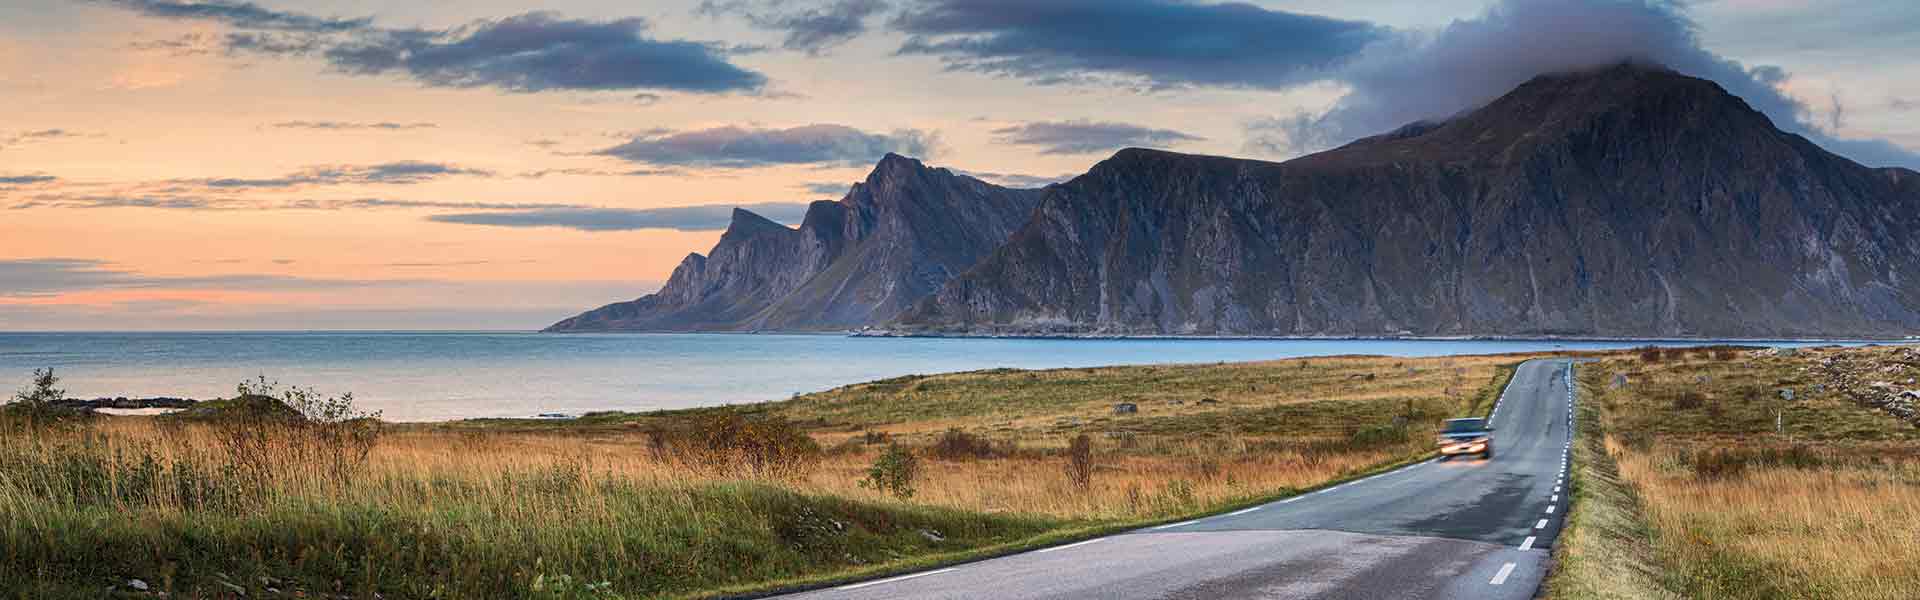 automobile traveling a mountain road in Lofoten Norway at sunset